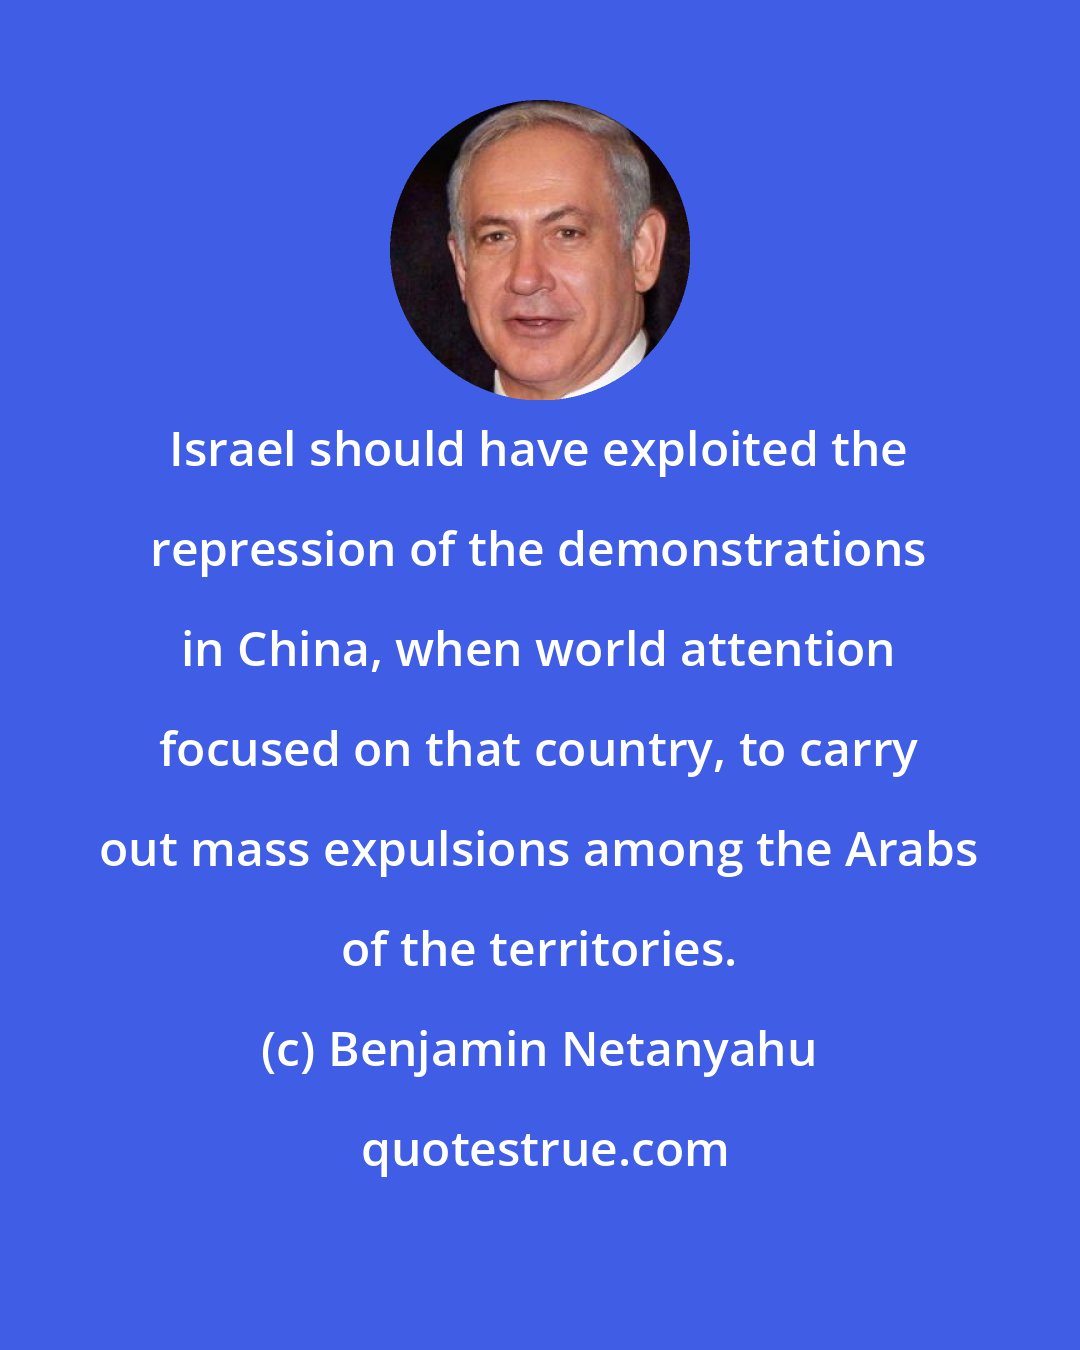 Benjamin Netanyahu: Israel should have exploited the repression of the demonstrations in China, when world attention focused on that country, to carry out mass expulsions among the Arabs of the territories.